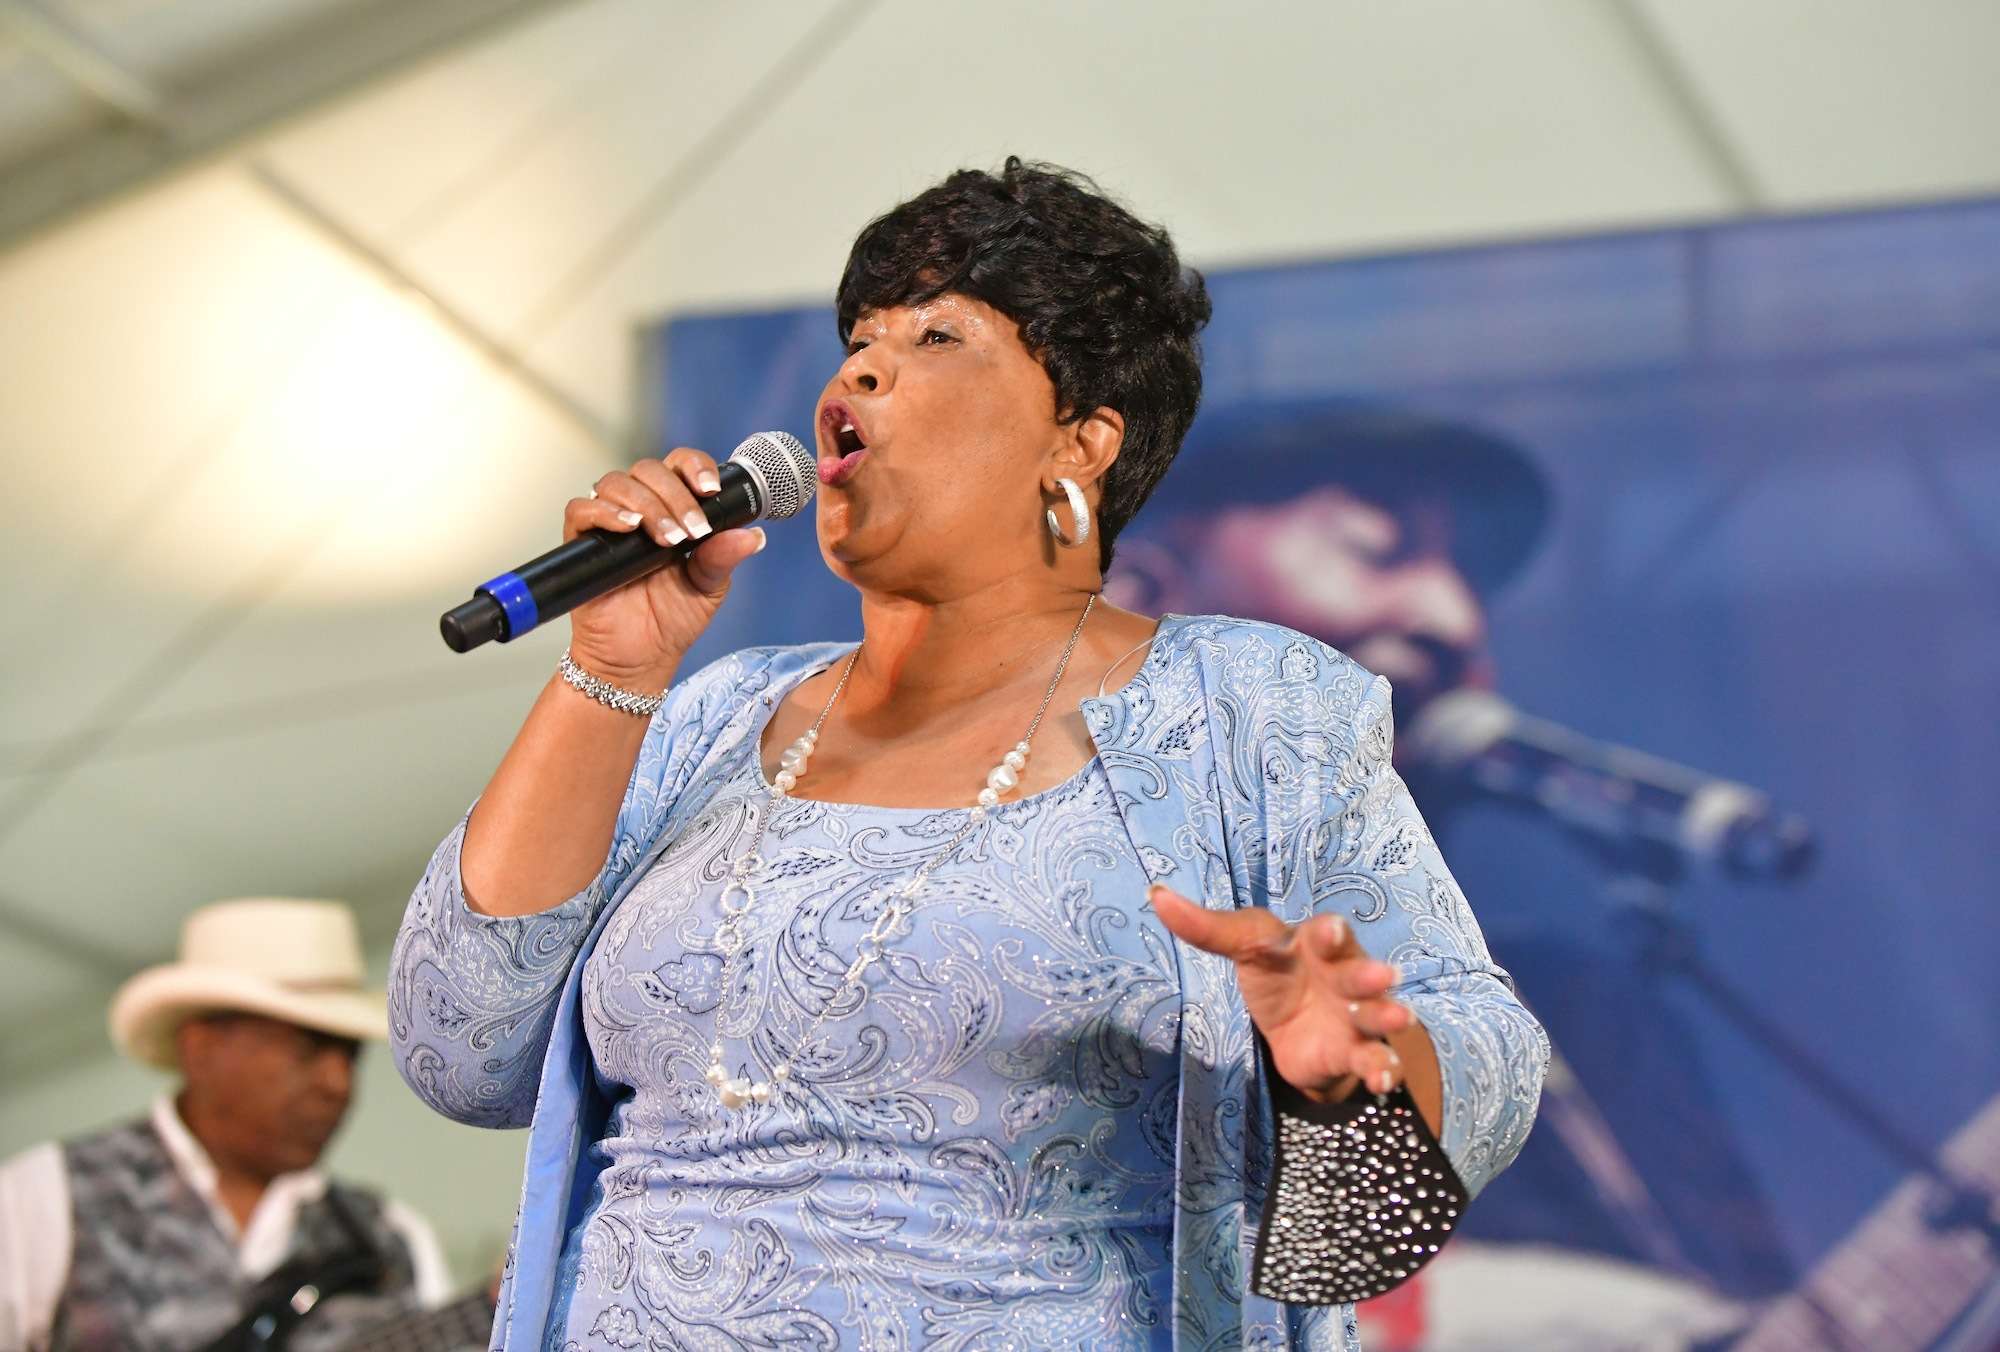 Ms Jody Live At Chicago Blues Fest [GALLERY] 6